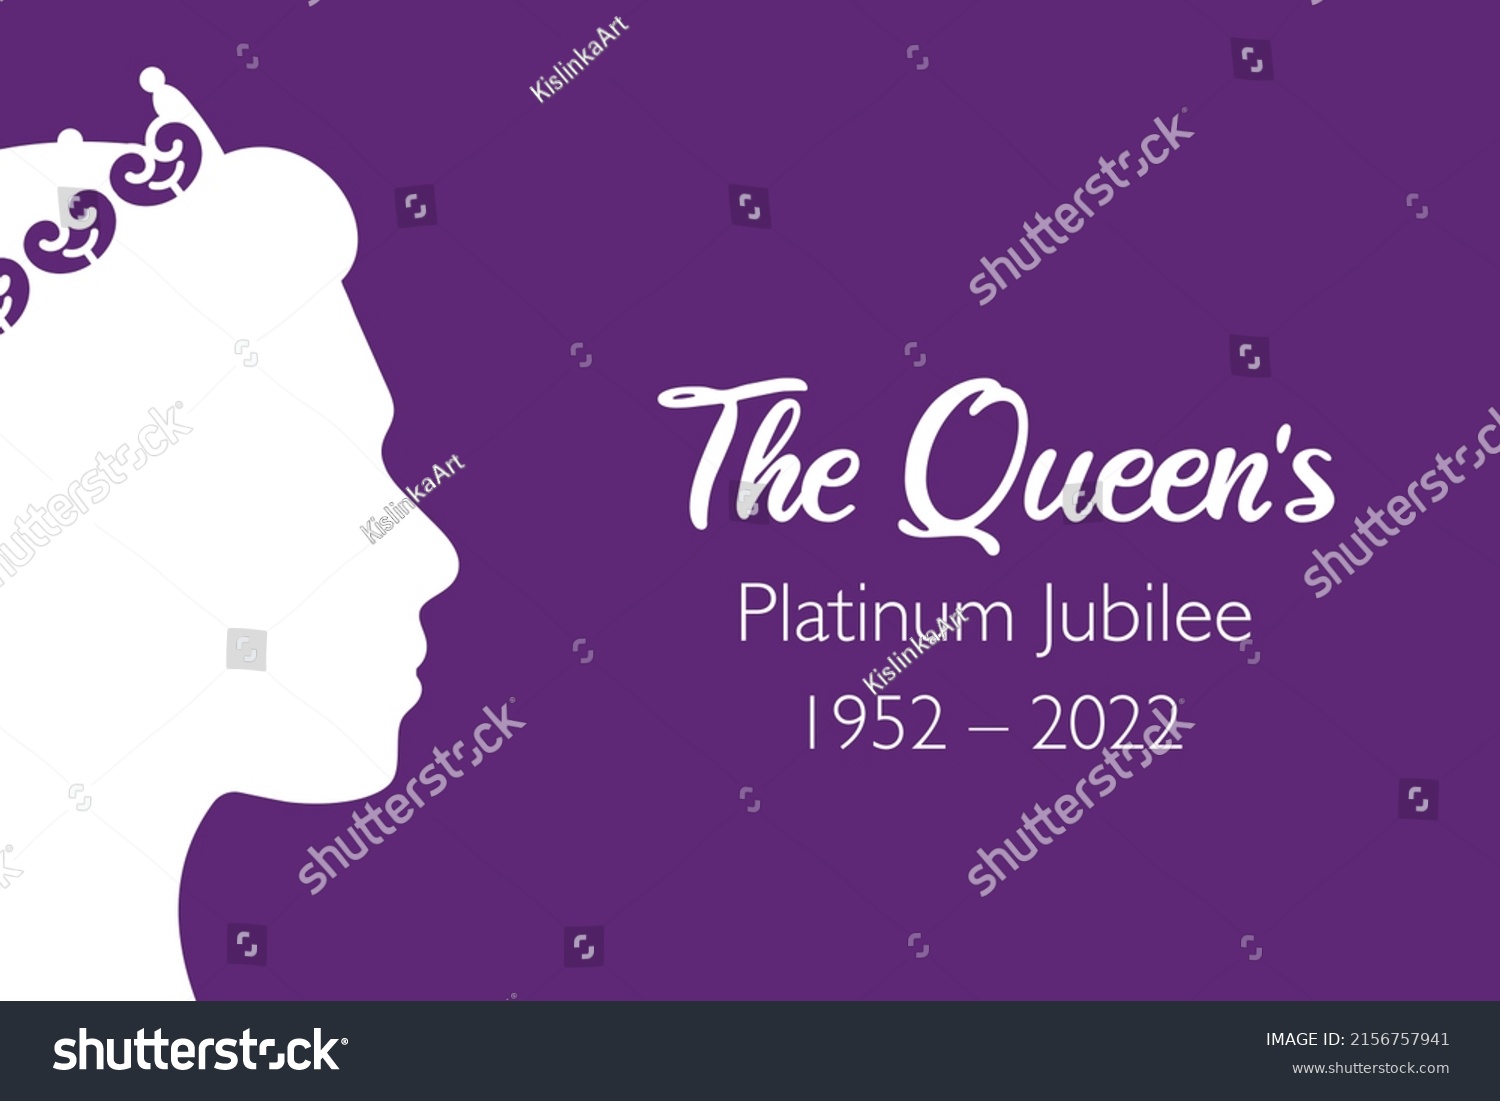 SVG of The Queen's Platinum Jubilee celebration banner with side profile of Queen Elizabeth in crown 70 years. Ideal design for banners, flayers, social media, stickers, greeting cards. 
 svg